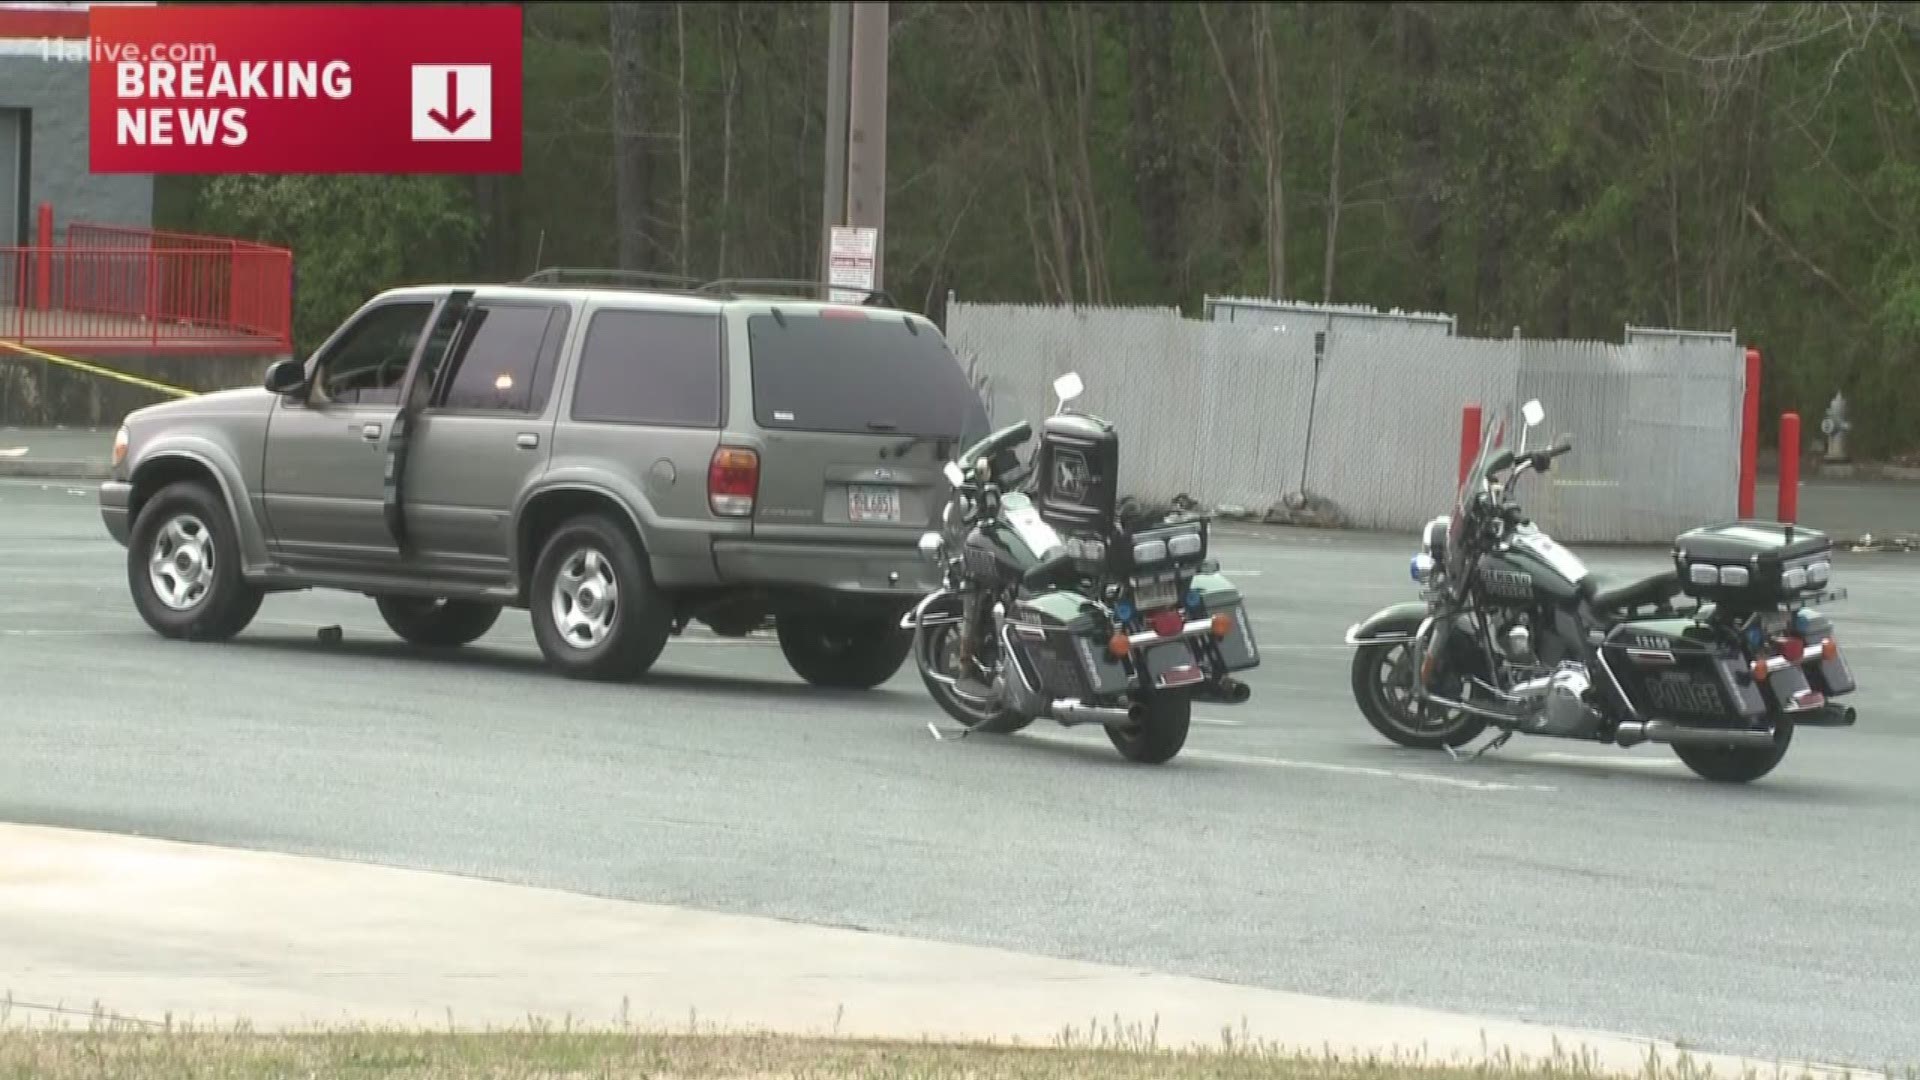 Authorities say a routine traffic stop carried out by motorcycle police ended with a suspect in critical condition on Wednesday - after he allegedly pulled a gun on them.